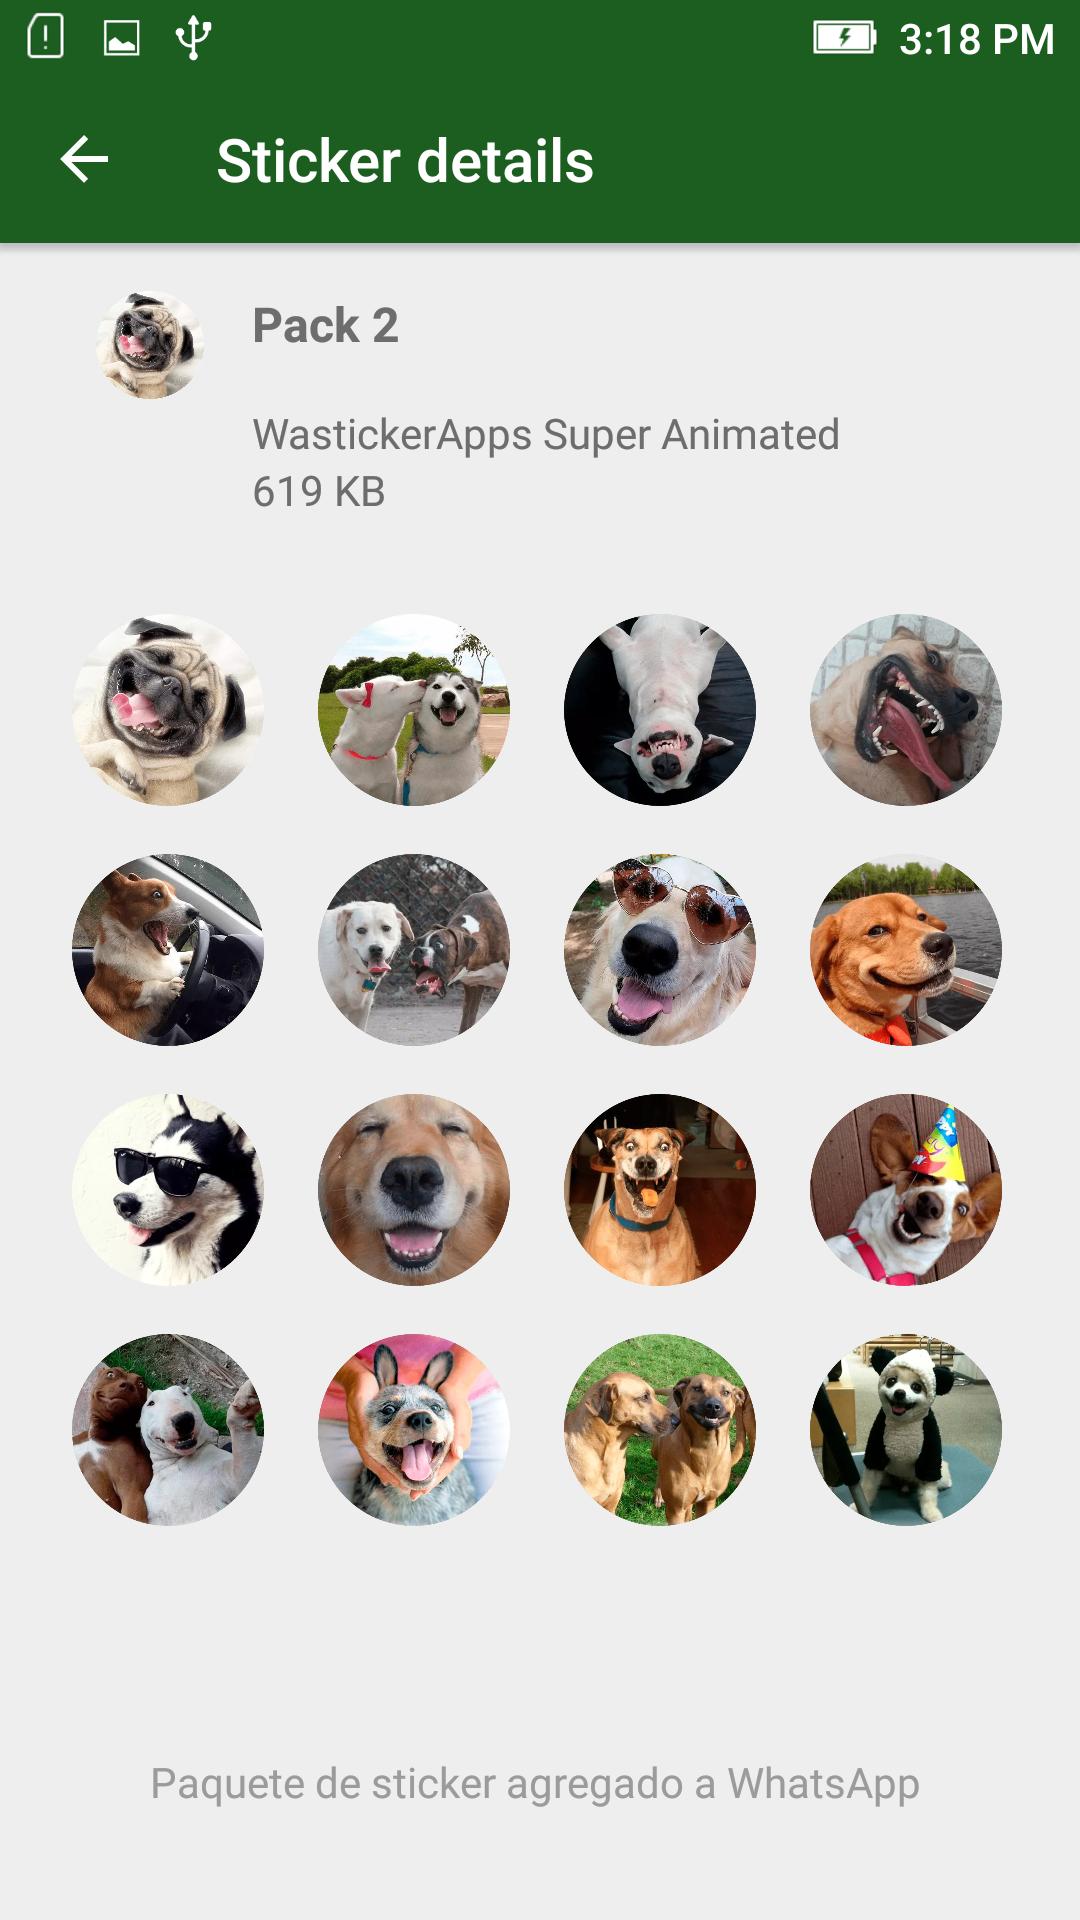 New Dog Memes Stickers Wastickerapps For Android Apk Download